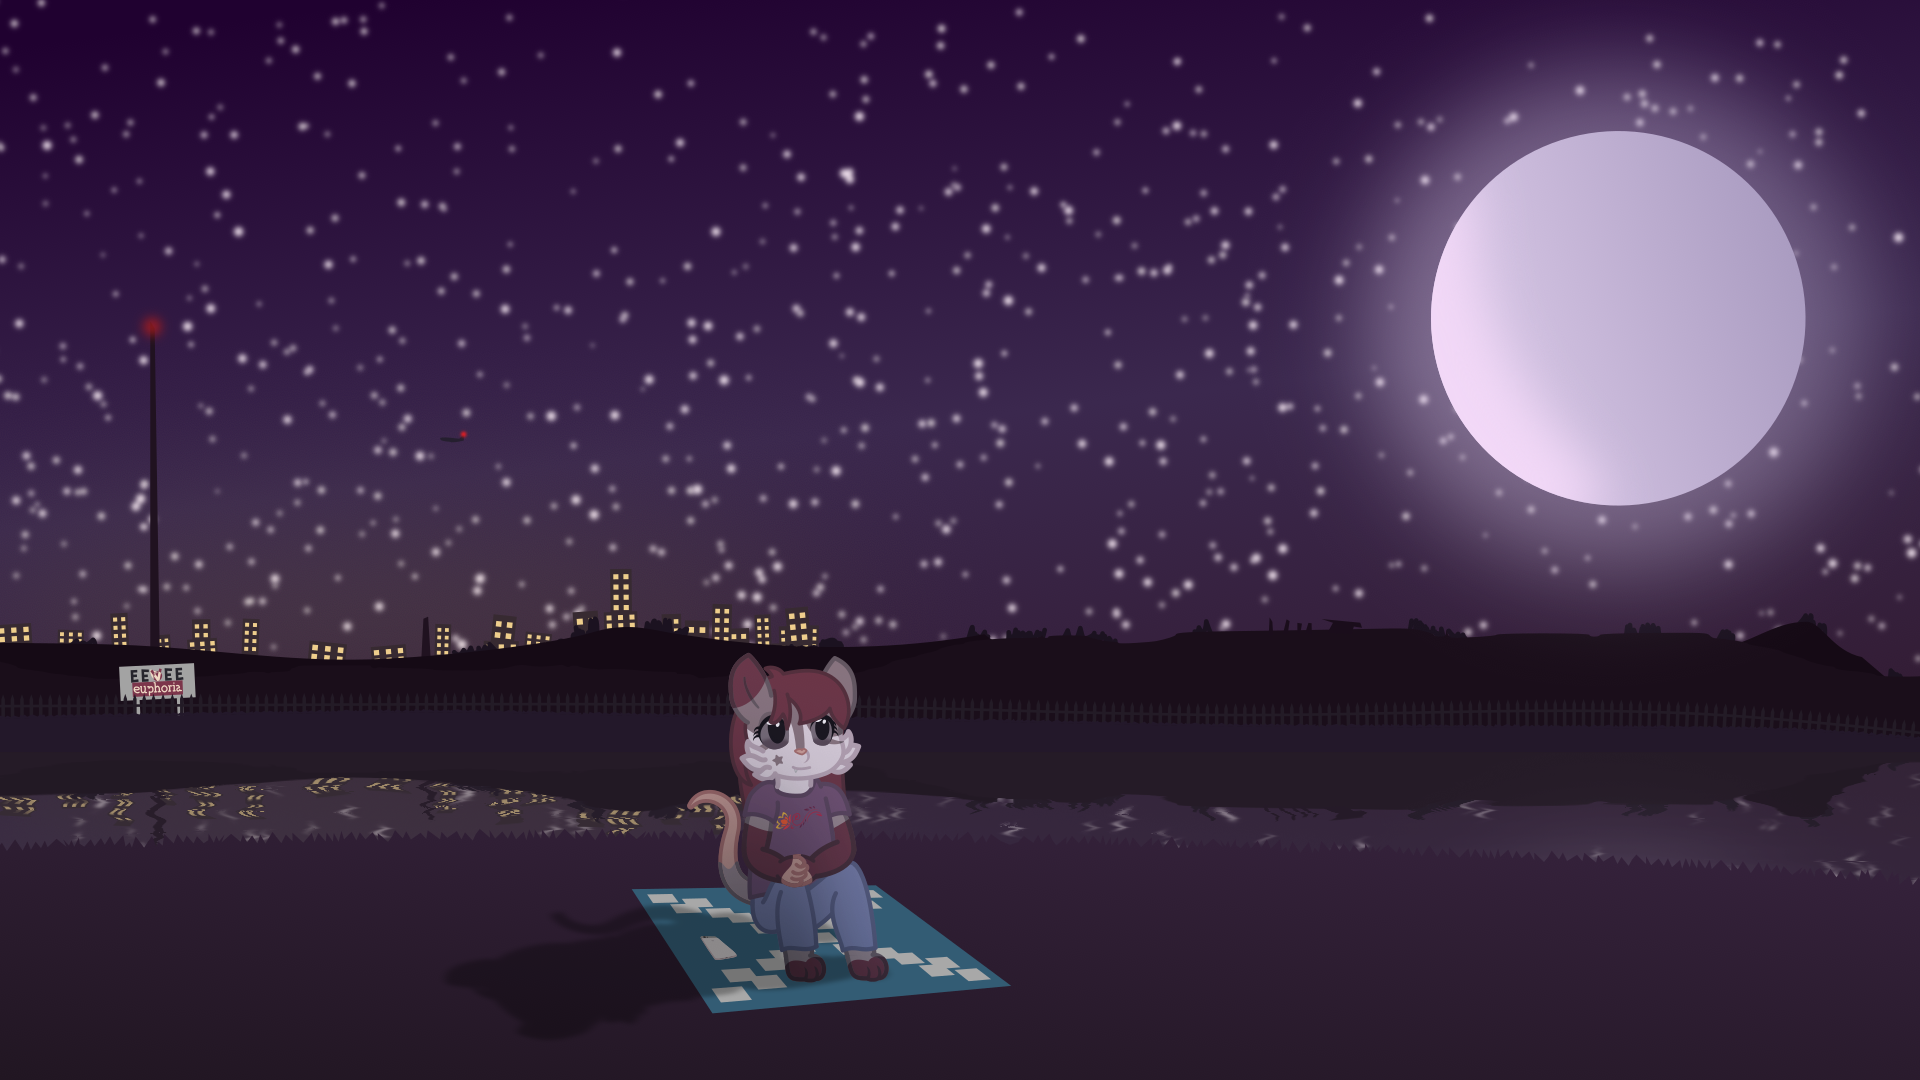 A possum is sitting down in the middle of a grassy field at night, the moonlight bathing her.